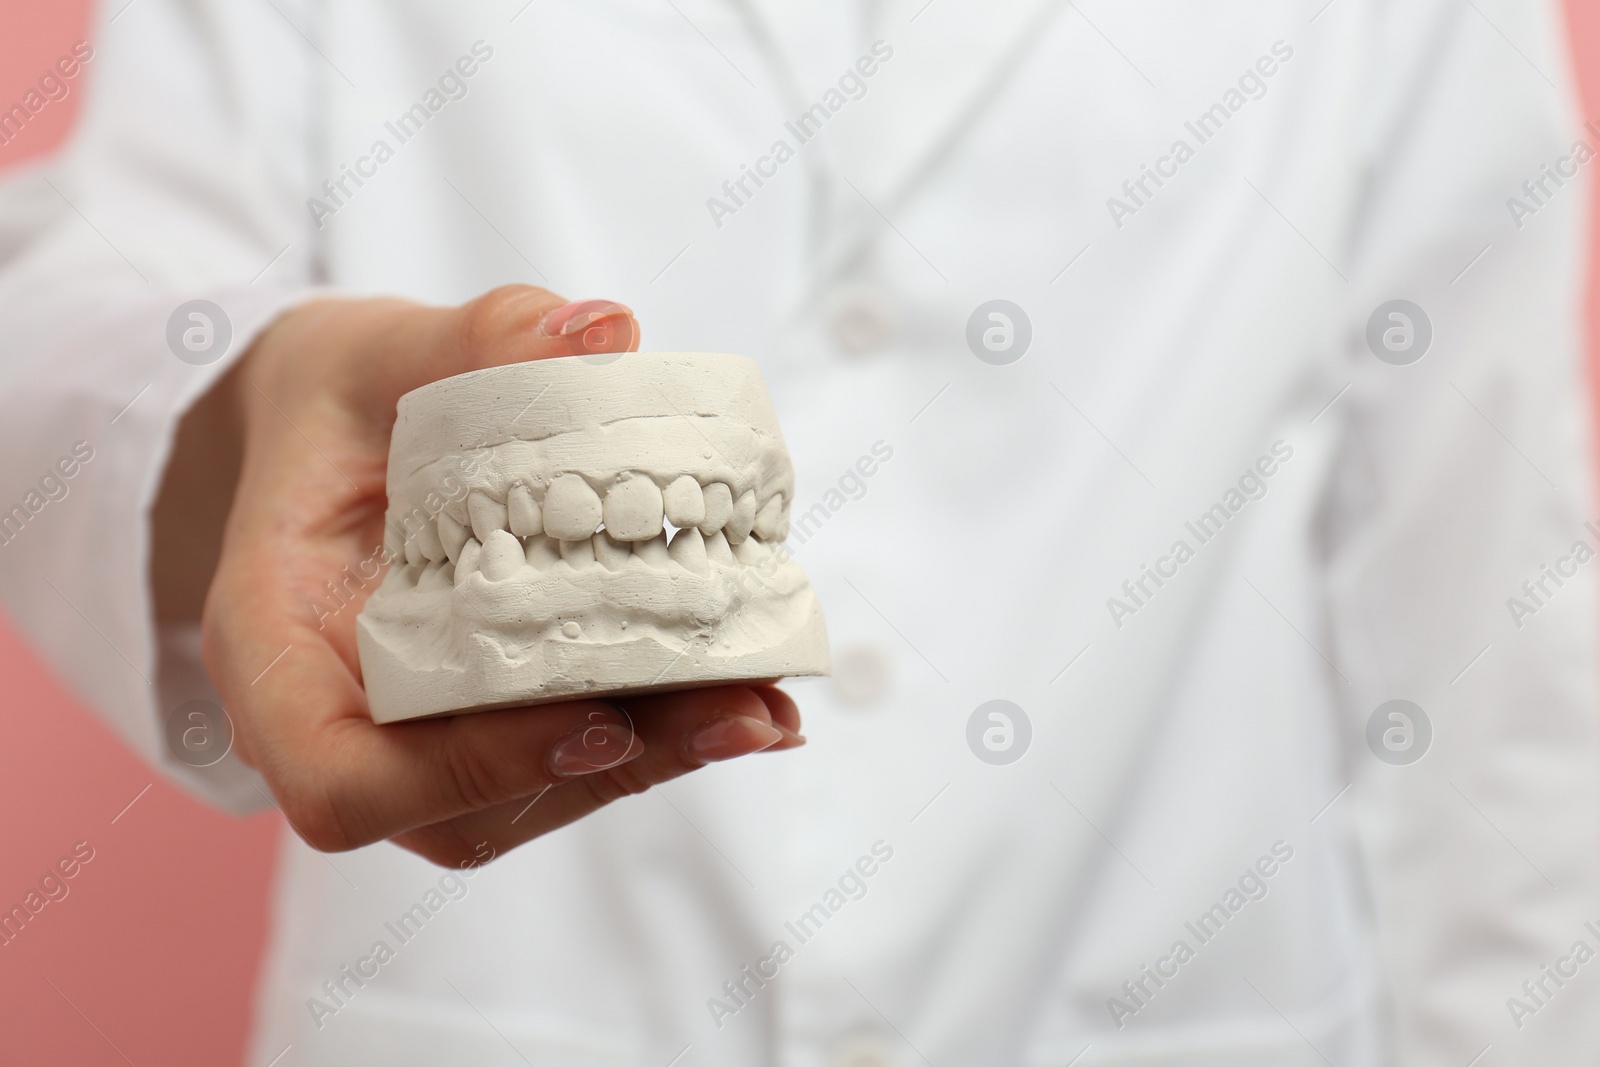 Photo of Doctor holding dental model with jaws on pink background, selective focus. Cast of teeth